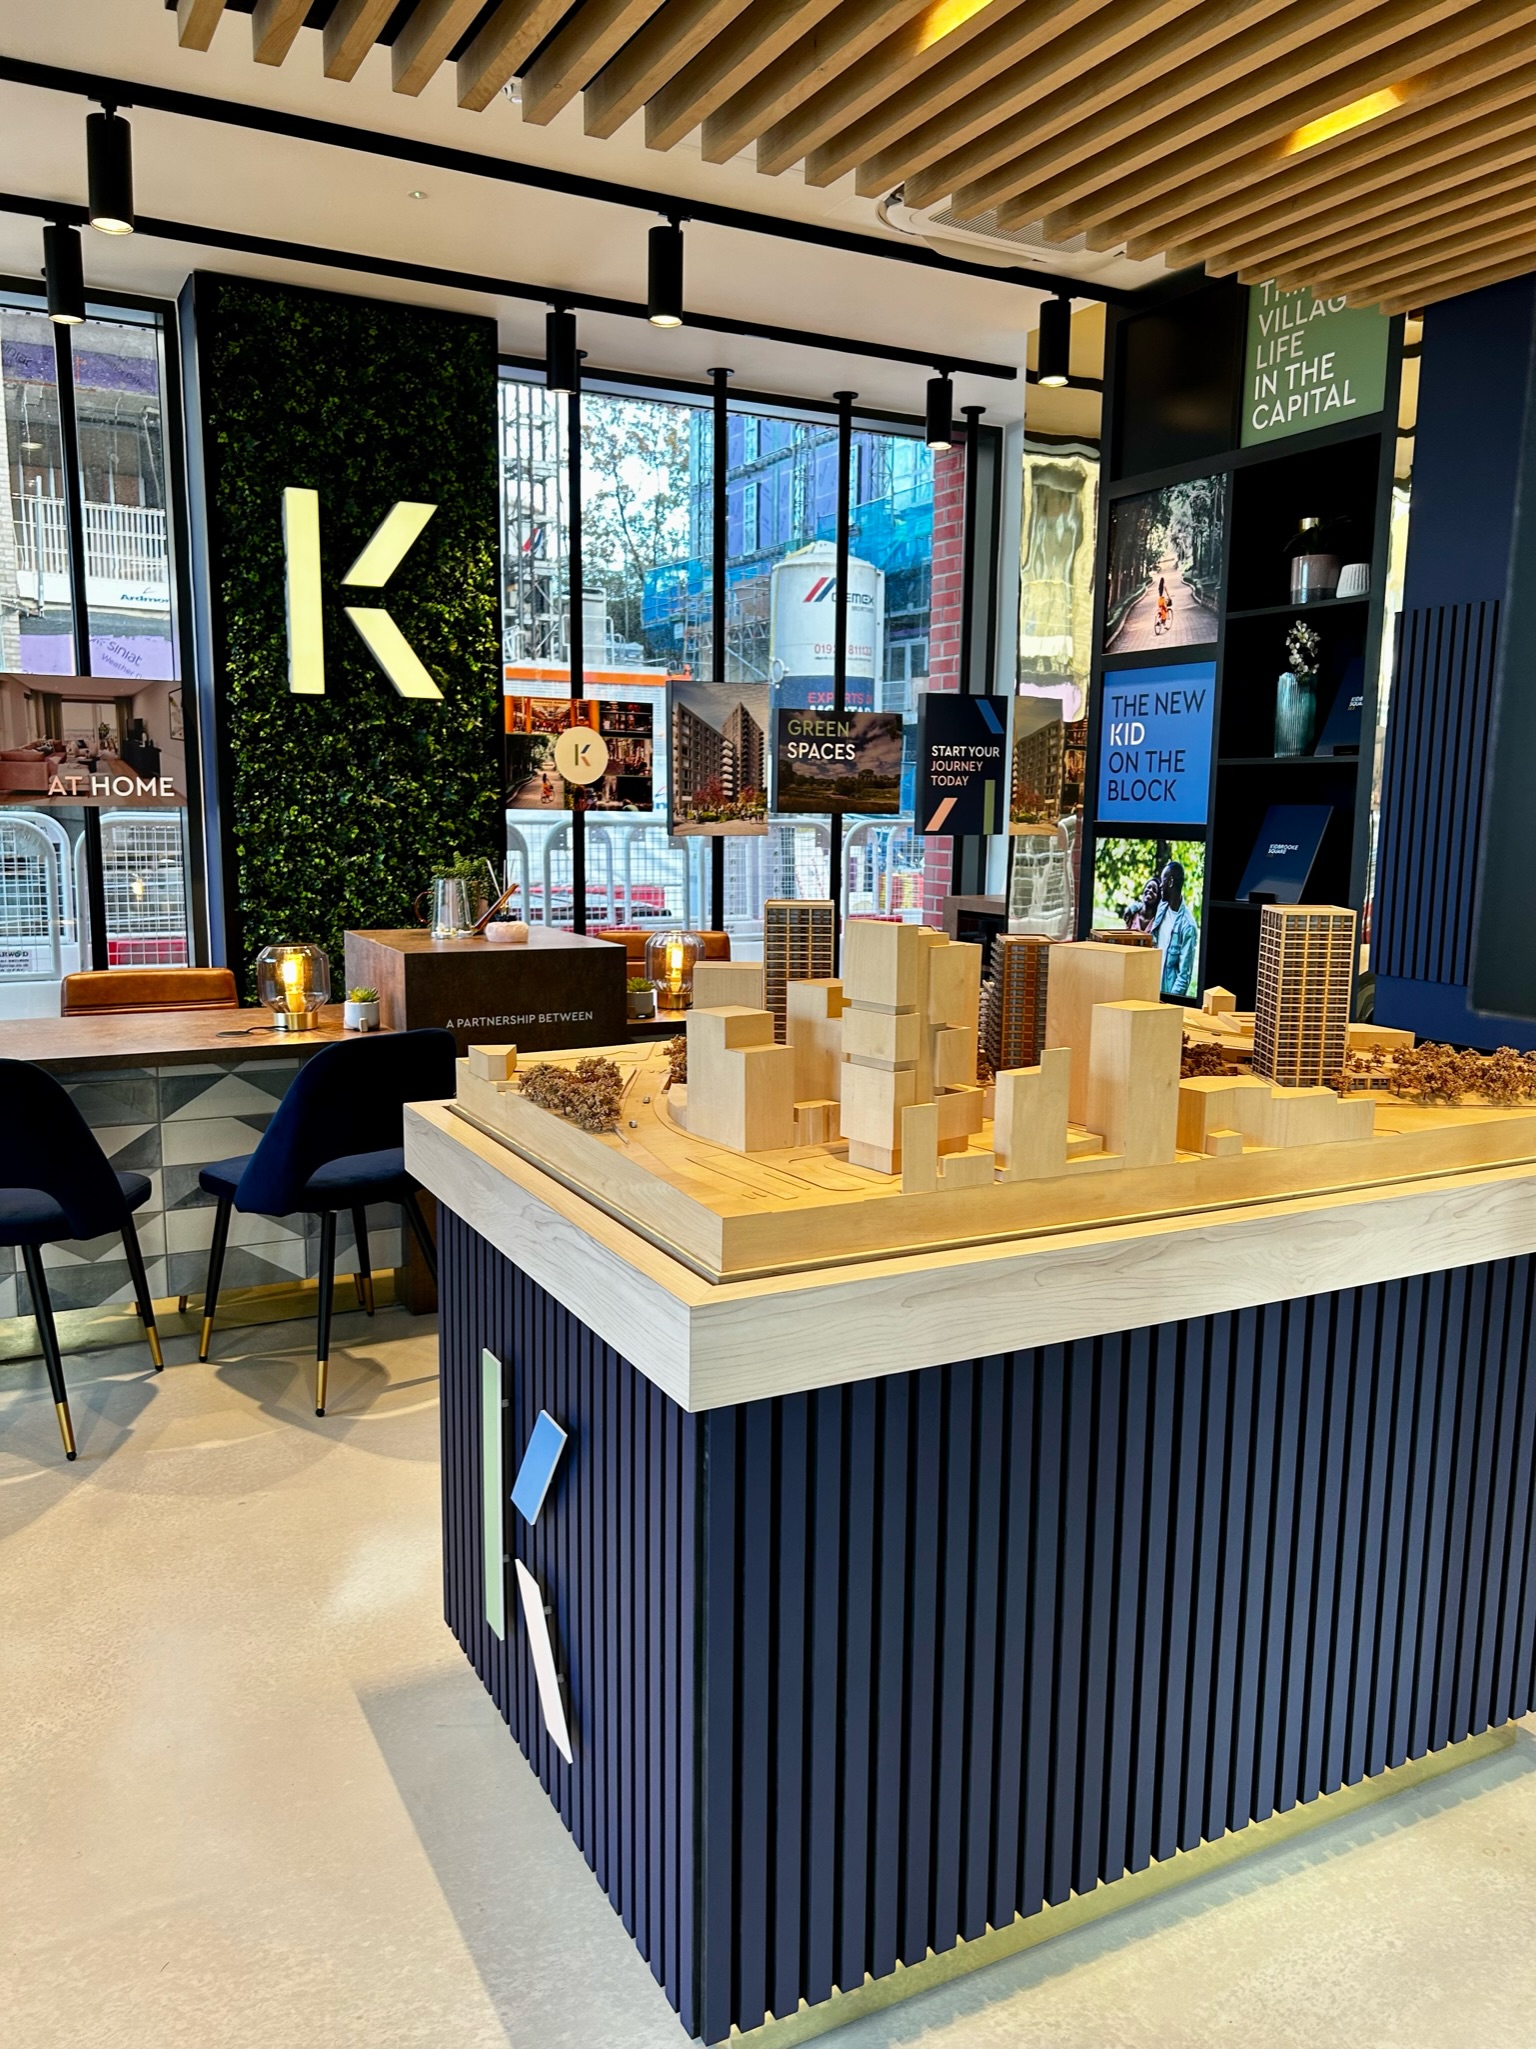 marketing suite with a large 3D model of the city around the development and various images of the development